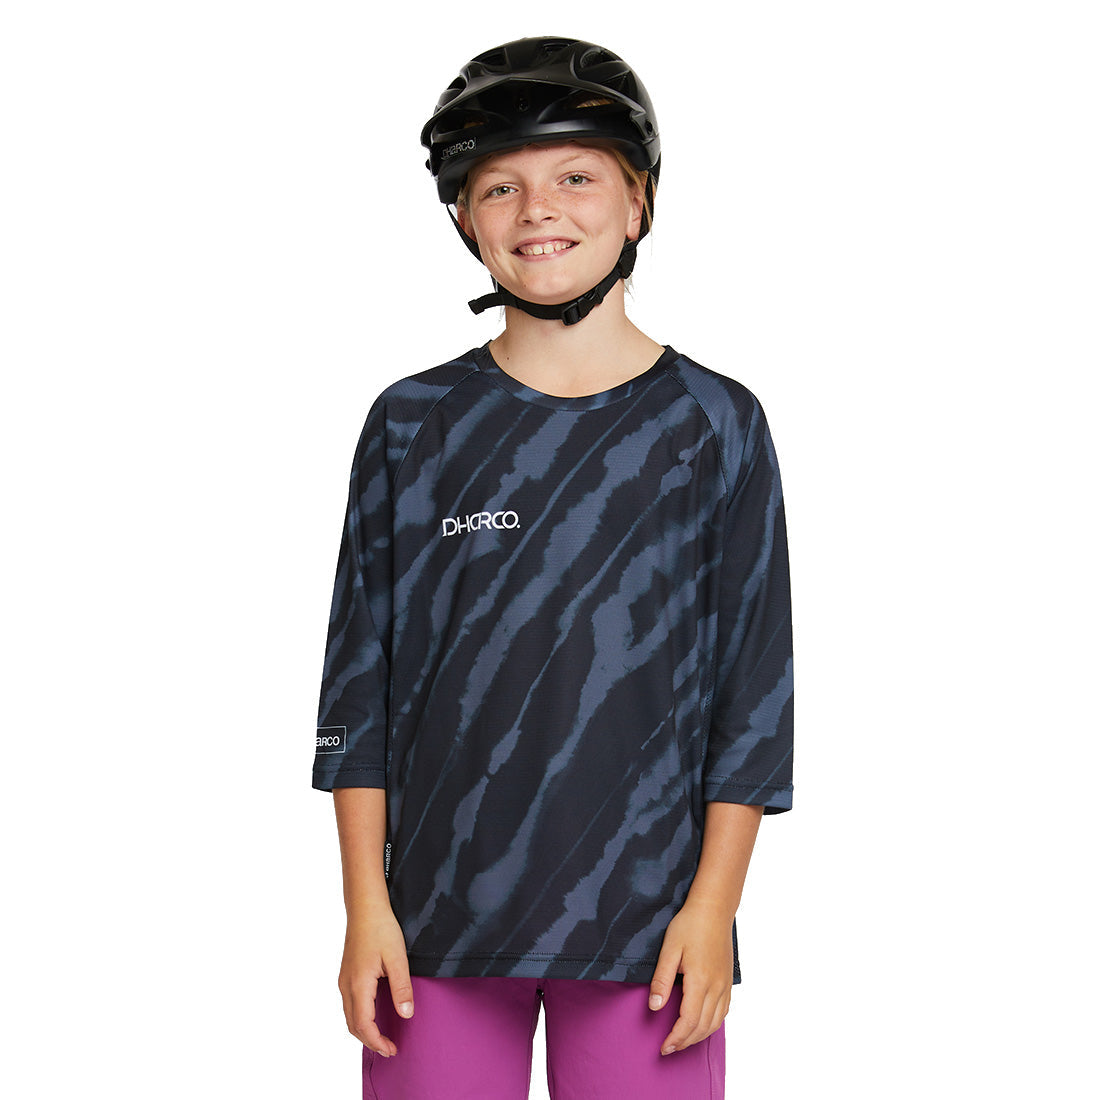 DHaRCO Youth 3-4 Sleeve Jersey - Youth L - Jet Stream